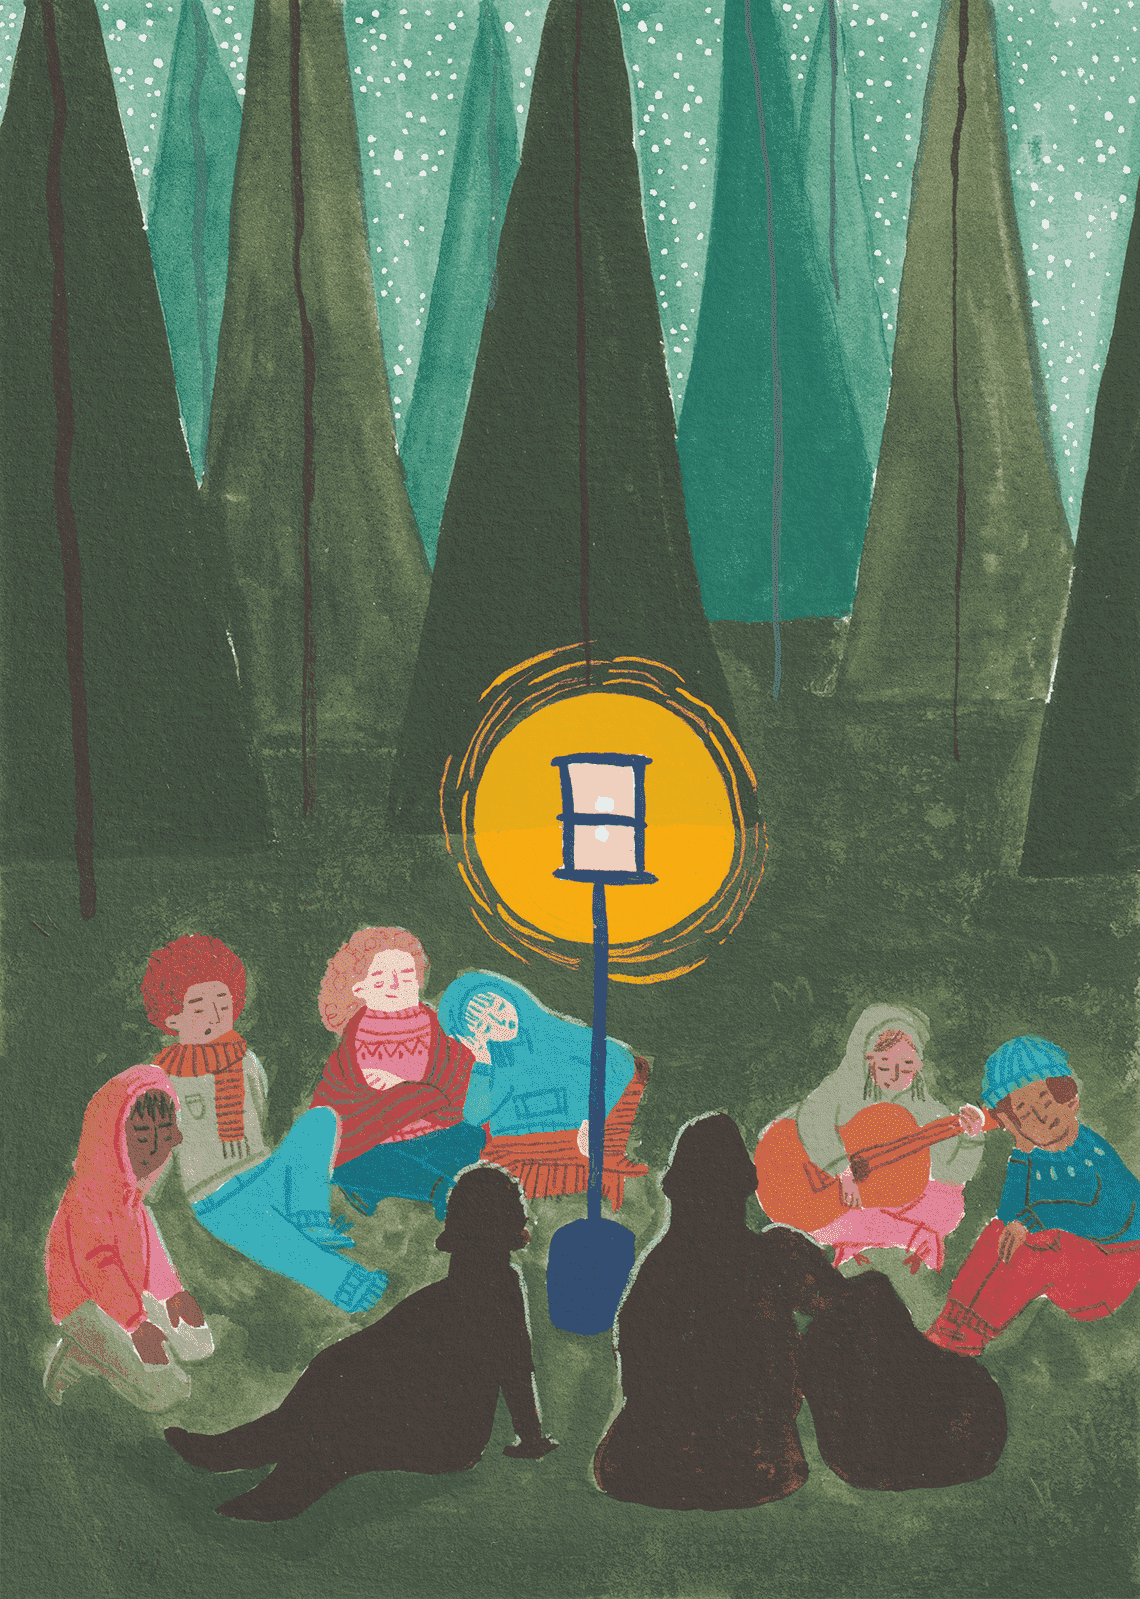 Gouache illustration of a group of friends hanging out in a circle in the middle of a forest, while singing and playing a guitar.